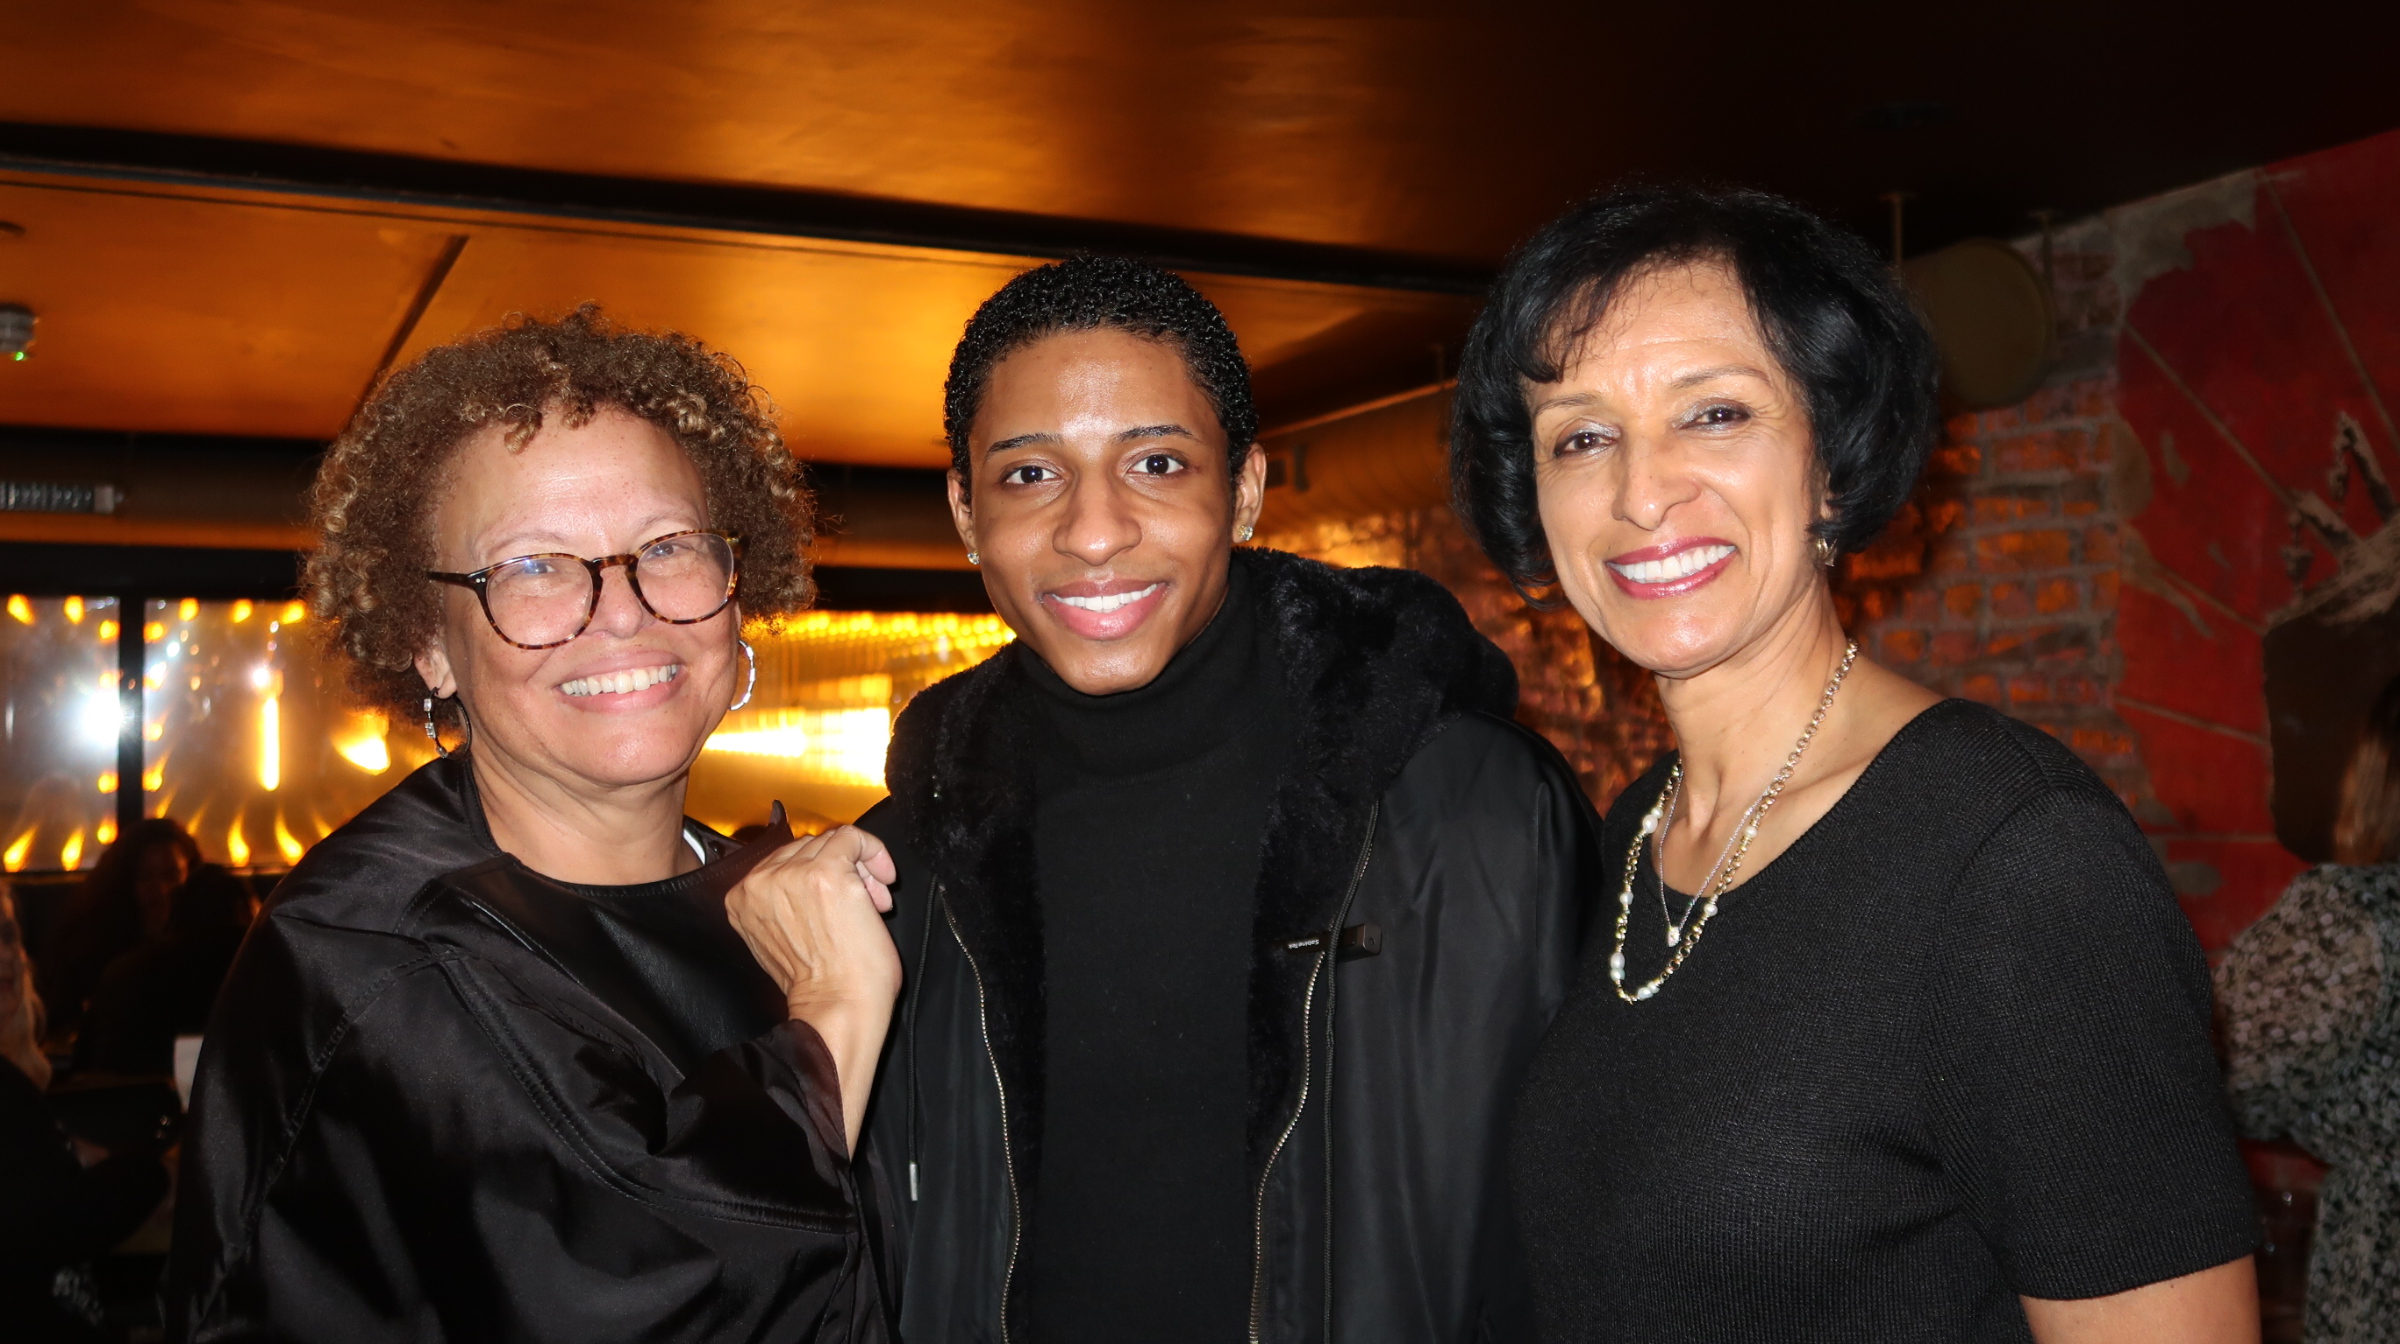 Myles Frost mingles with Dr. Breaux and Debra Lee, the former Chairman and CEO of BET. Lee currently serves as a board member for Warner Bros. Discovery.